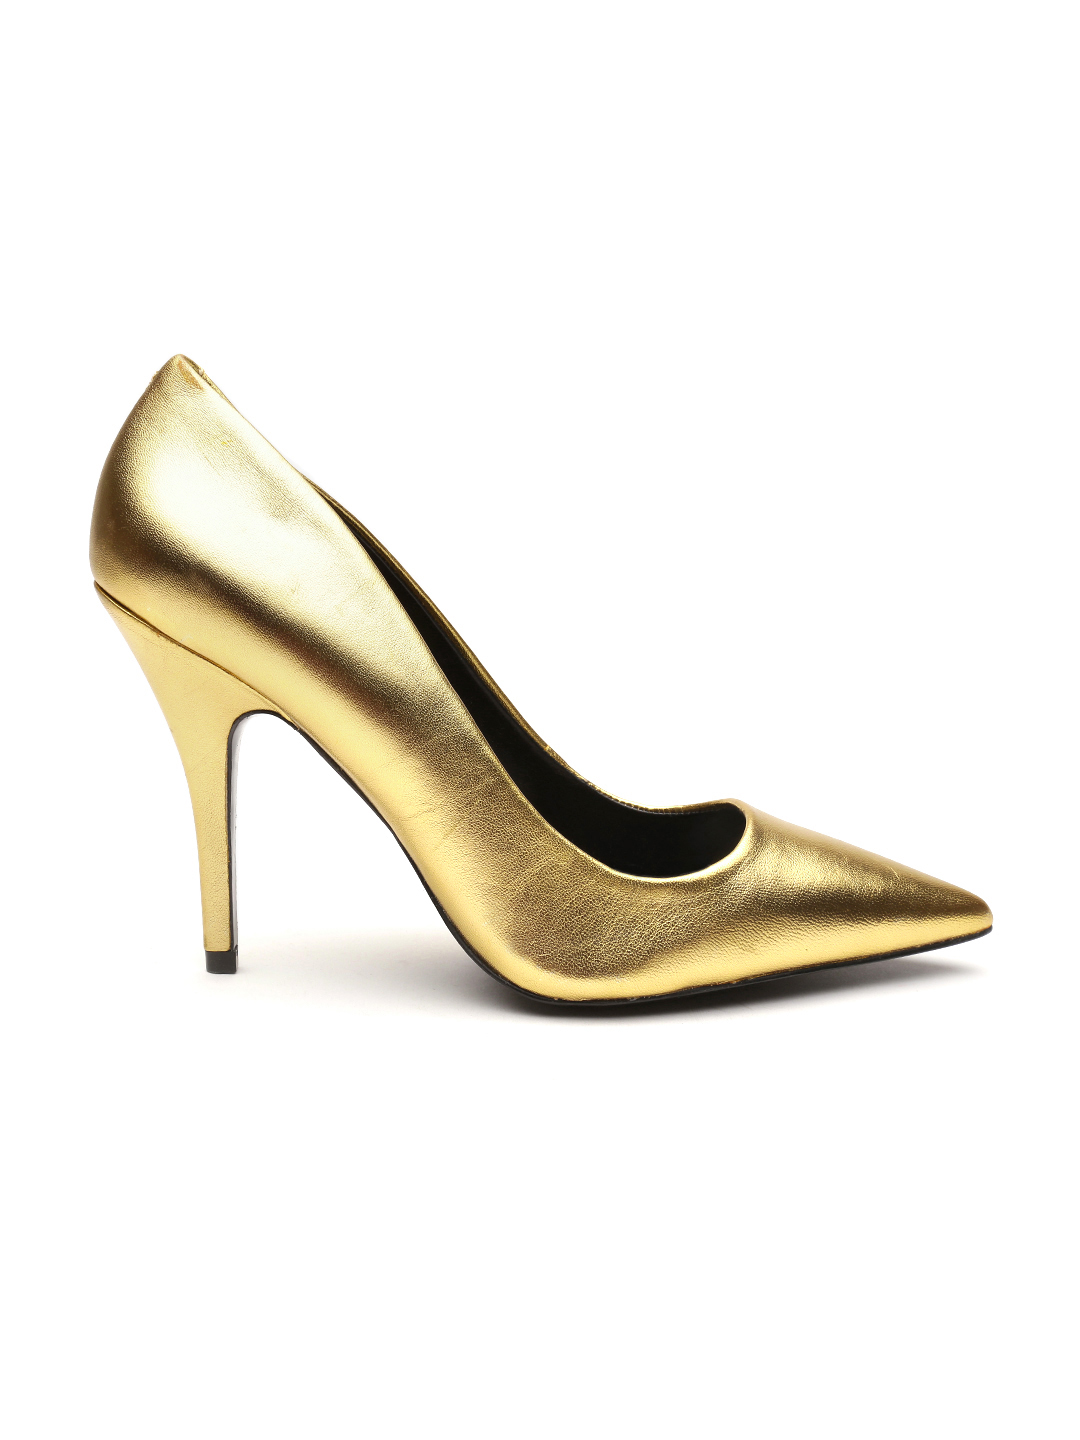 ALDO Women Gold-Toned Glossy Leather Pumps